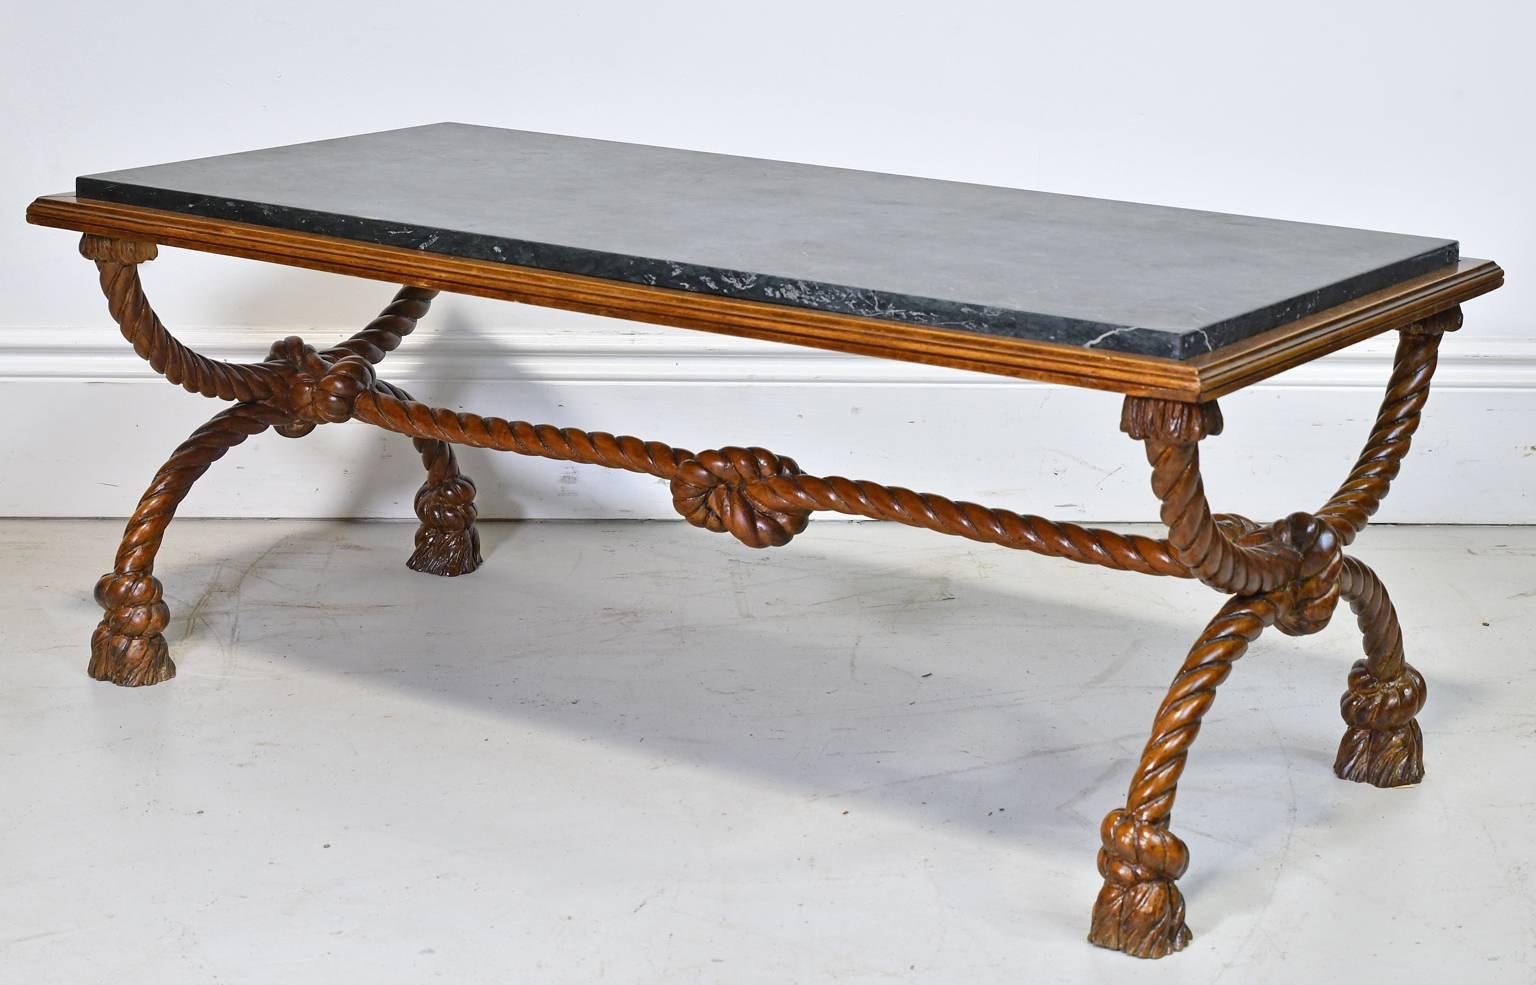 French Antique Marble Top Coffee Table. Mid 20th century Napoleon III style carved rope and marble coffee table in the manner of A.M.E. Fournier. Frame is carved to look like knotted and tassled ropes. A.M.E. Fournier furniture company was